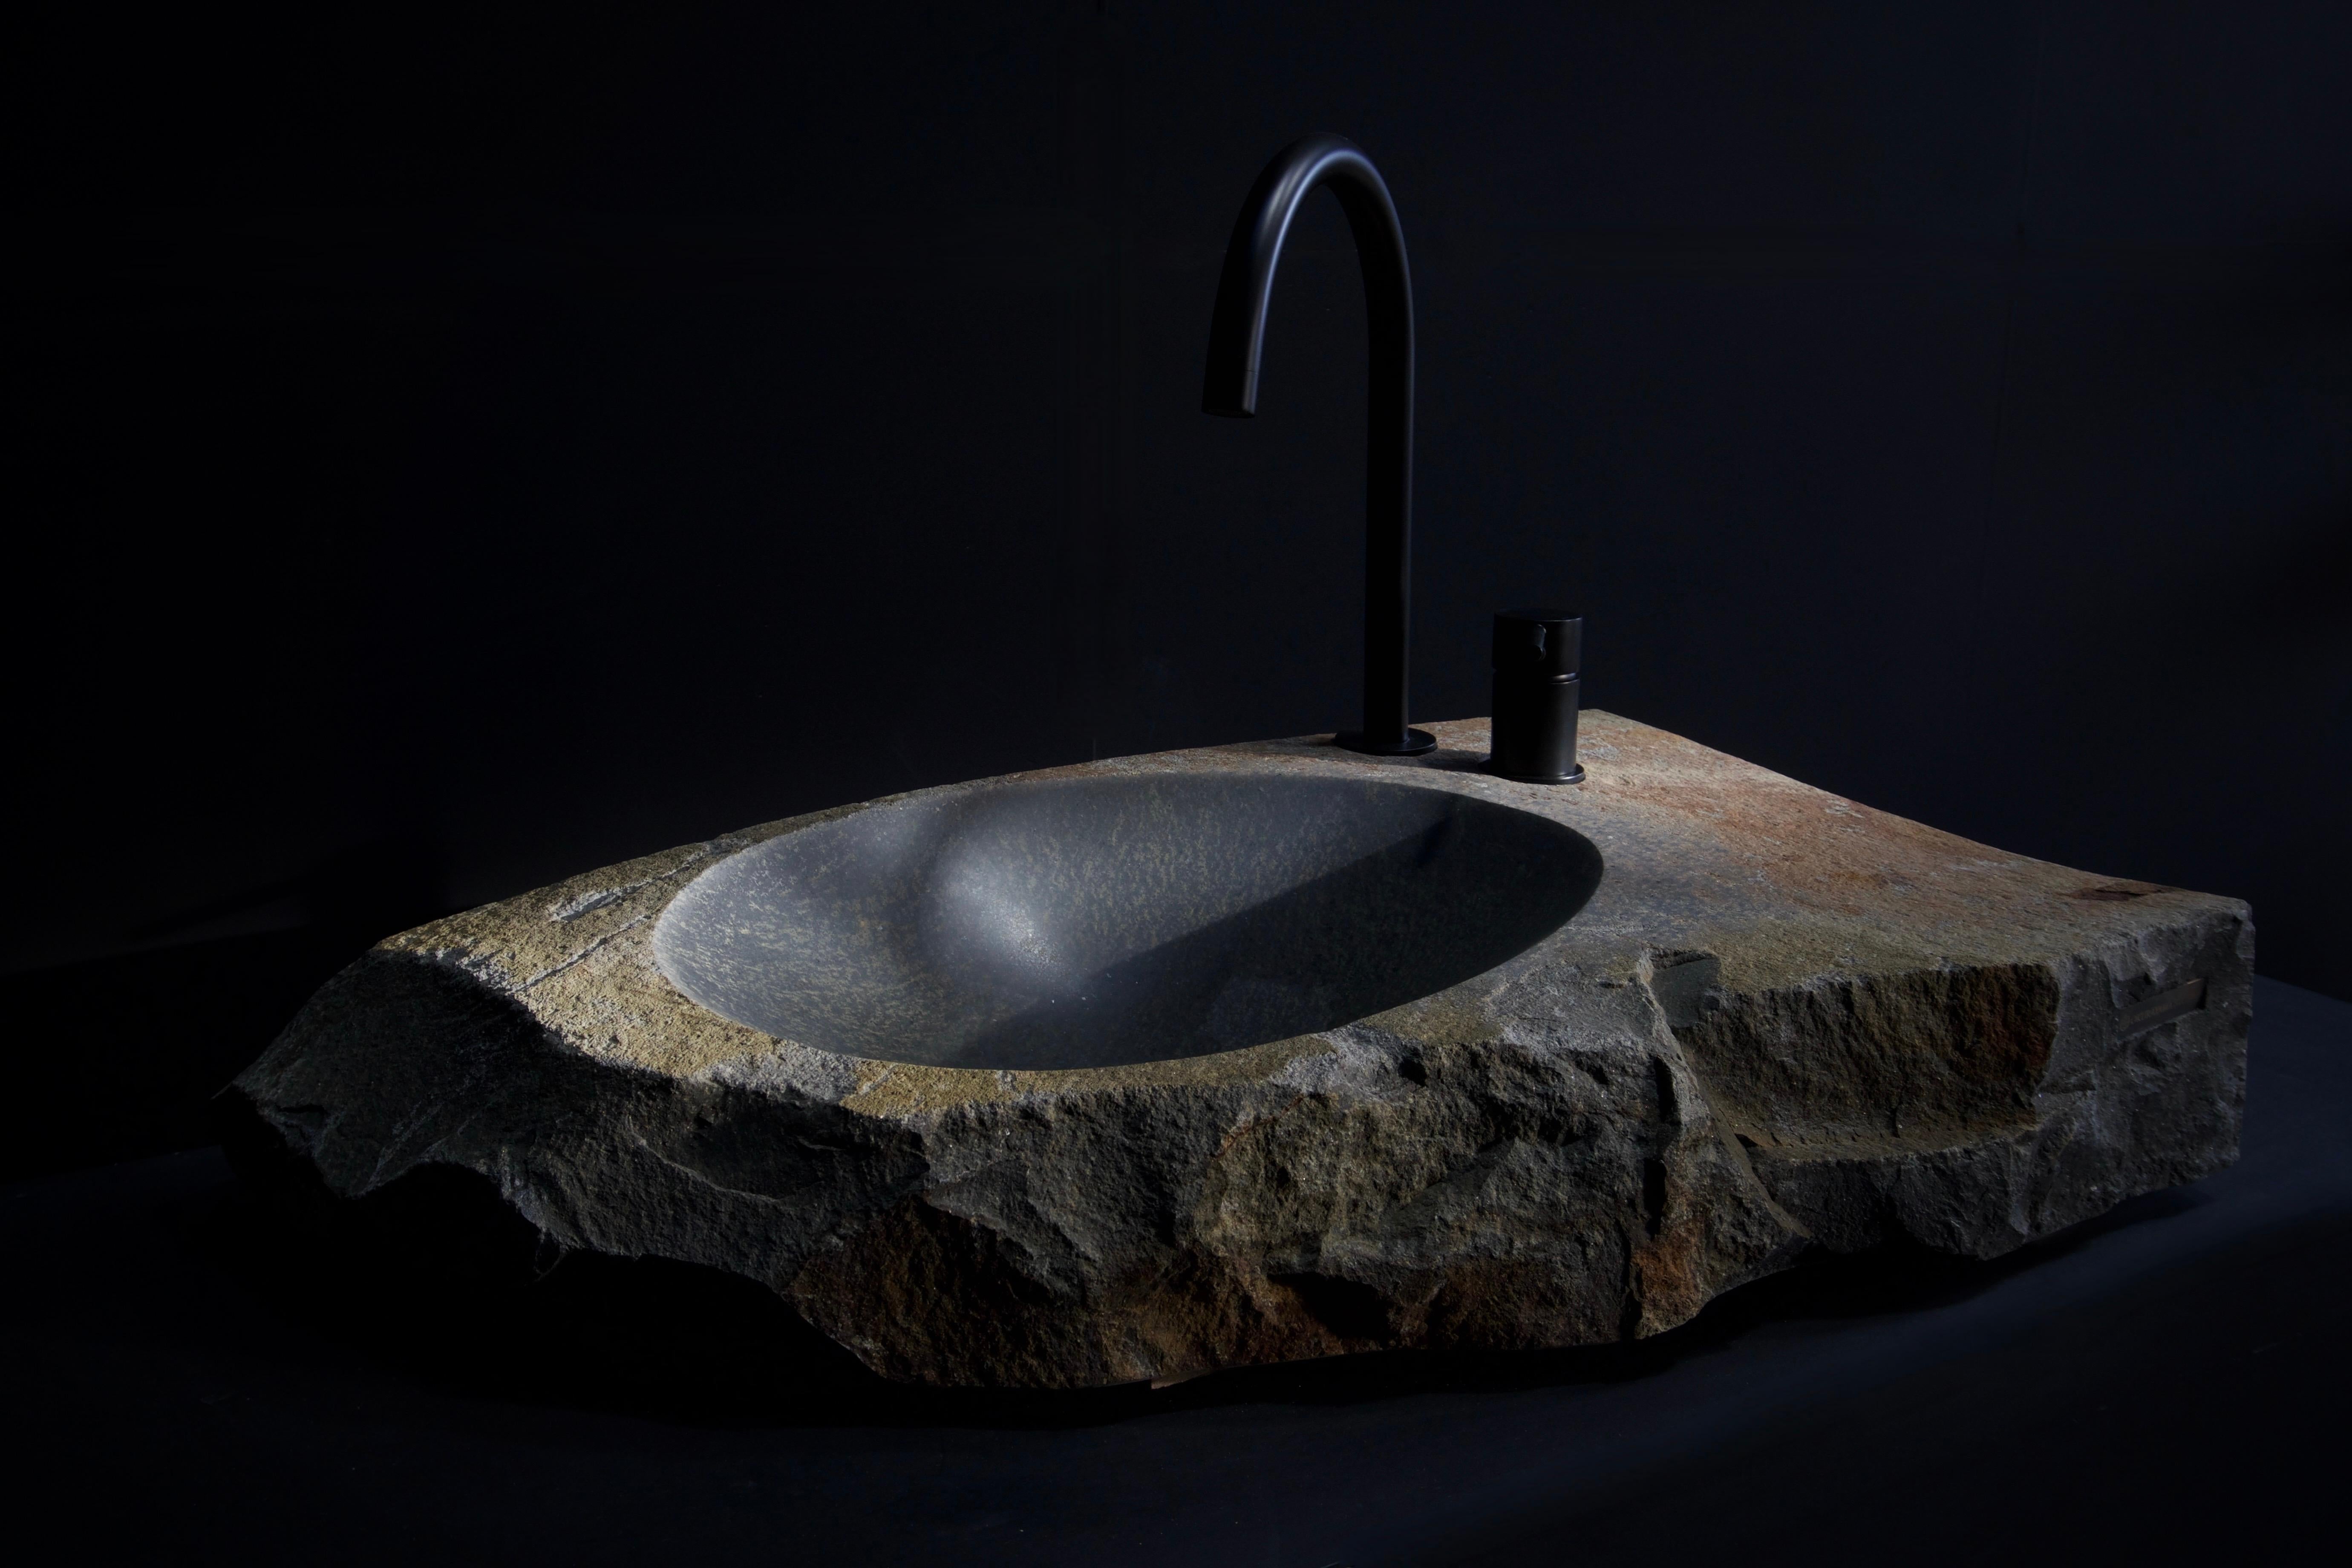 Washbasin S10 Sink by Okurayama
One Of A Kind.
Dimensions: D 44,5 x W 79,8 x H 13 cm.
Material: Daté Kan Stone.

The Daté Kan Stone is a rare stone that exist only in a few mountains in Japan.

The defining characteristic of Date´ Kan Stone is that